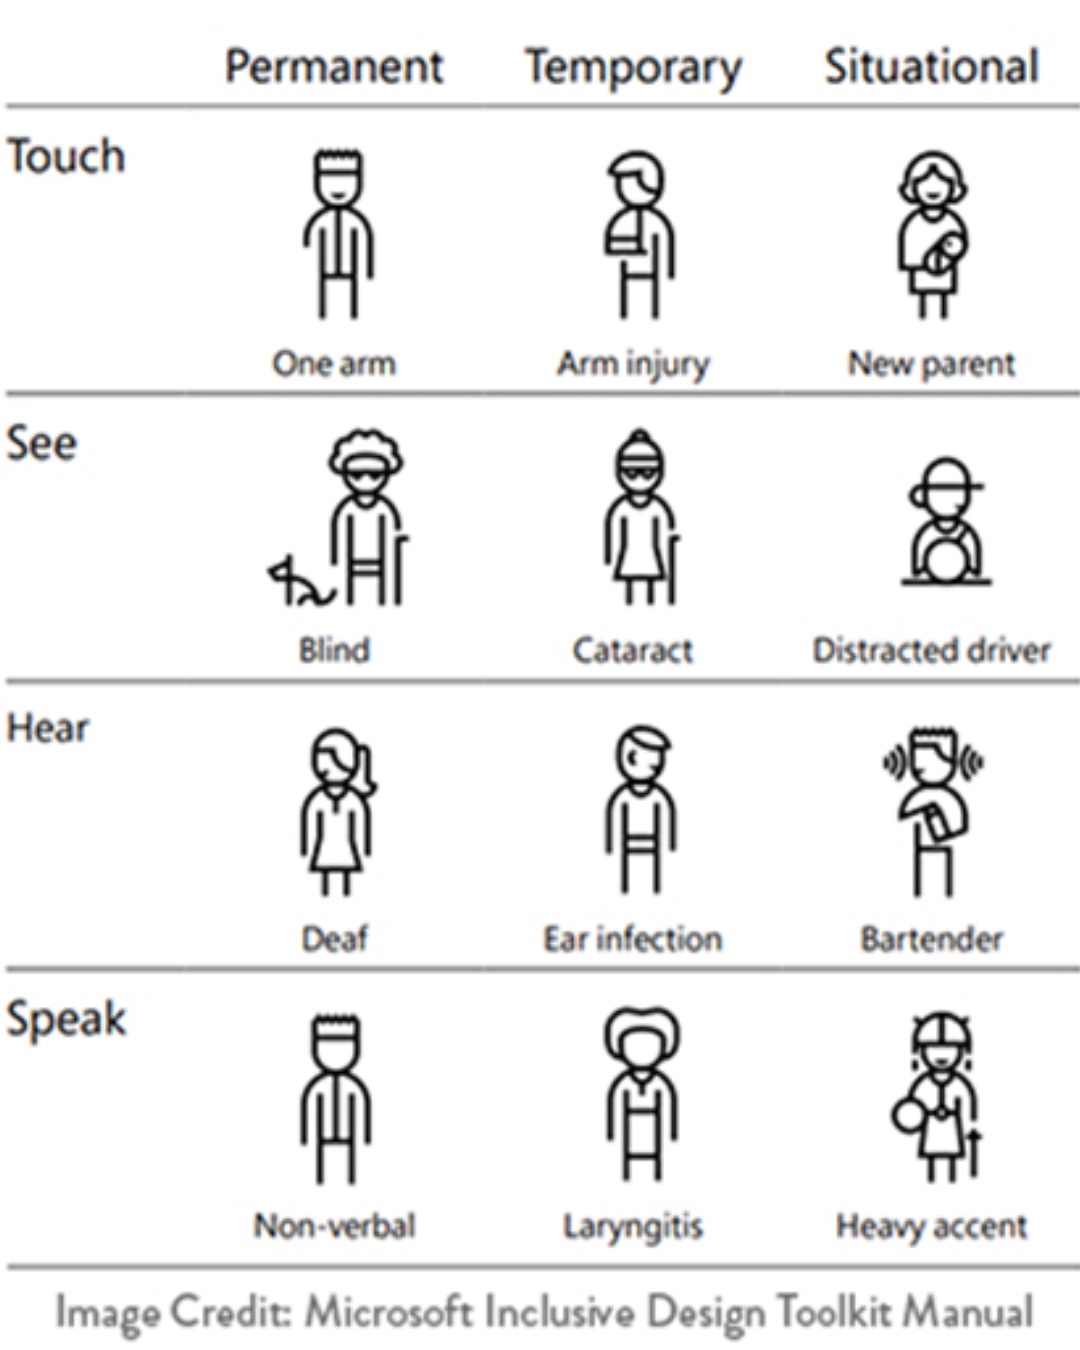 Types of disability: Touch: Permanent: One Arm. Temporary: Arm injury. Situational: New parent holding a child. See: Permanent: Blind. Temporary: Cataract. Situational: Distracted driver. Hear: Permanent: Deaf. Temporary: Ear Infection. Situational: Bartender in a noisy club. Speak: Permanent: Non-verbal. Temporary: Laryngitis. Situational: Heavy accent. Image Credit: Microsoft Inclusive Design Toolkit Manual.